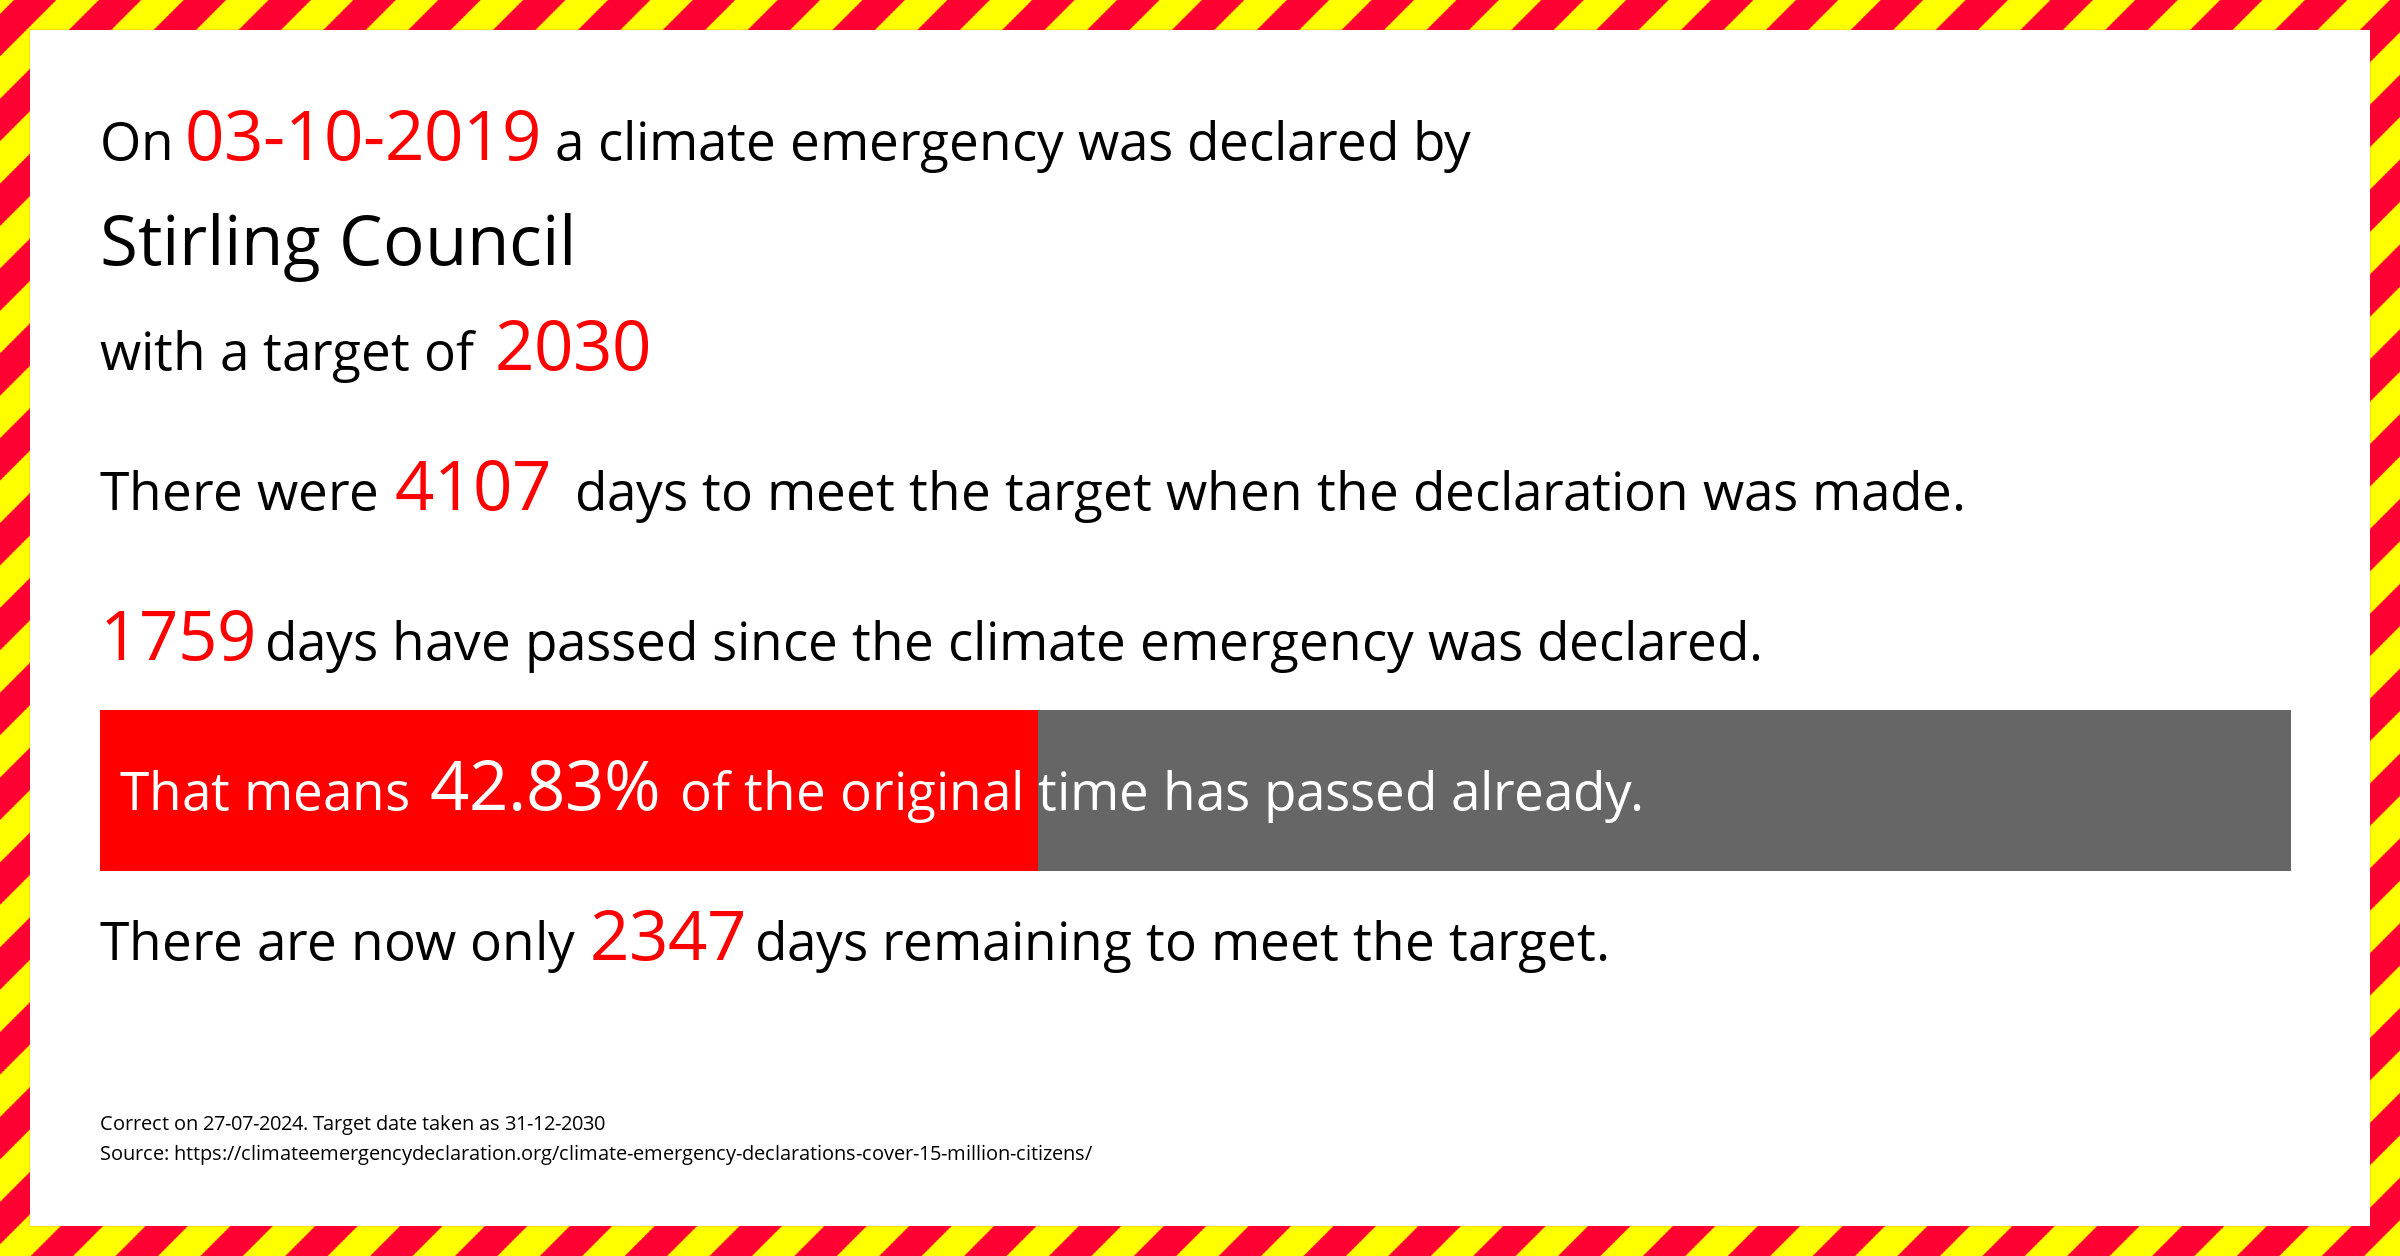 Stirling Council declared a Climate emergency on Thursday 3rd October 2019, with a target of 2030.